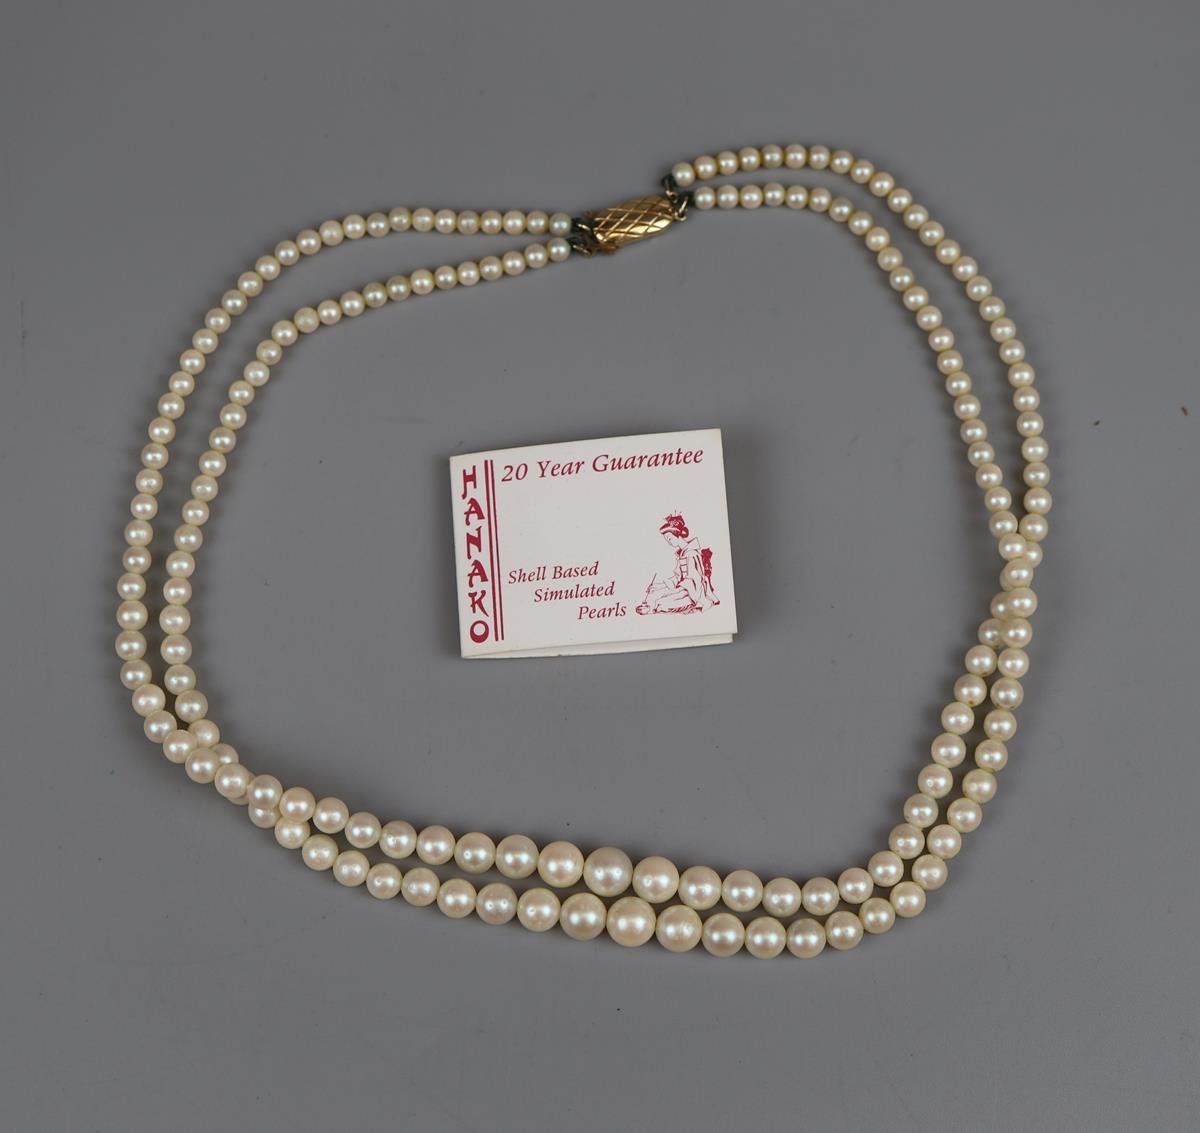 Simulated pearl necklace by Hanako with gold clasp